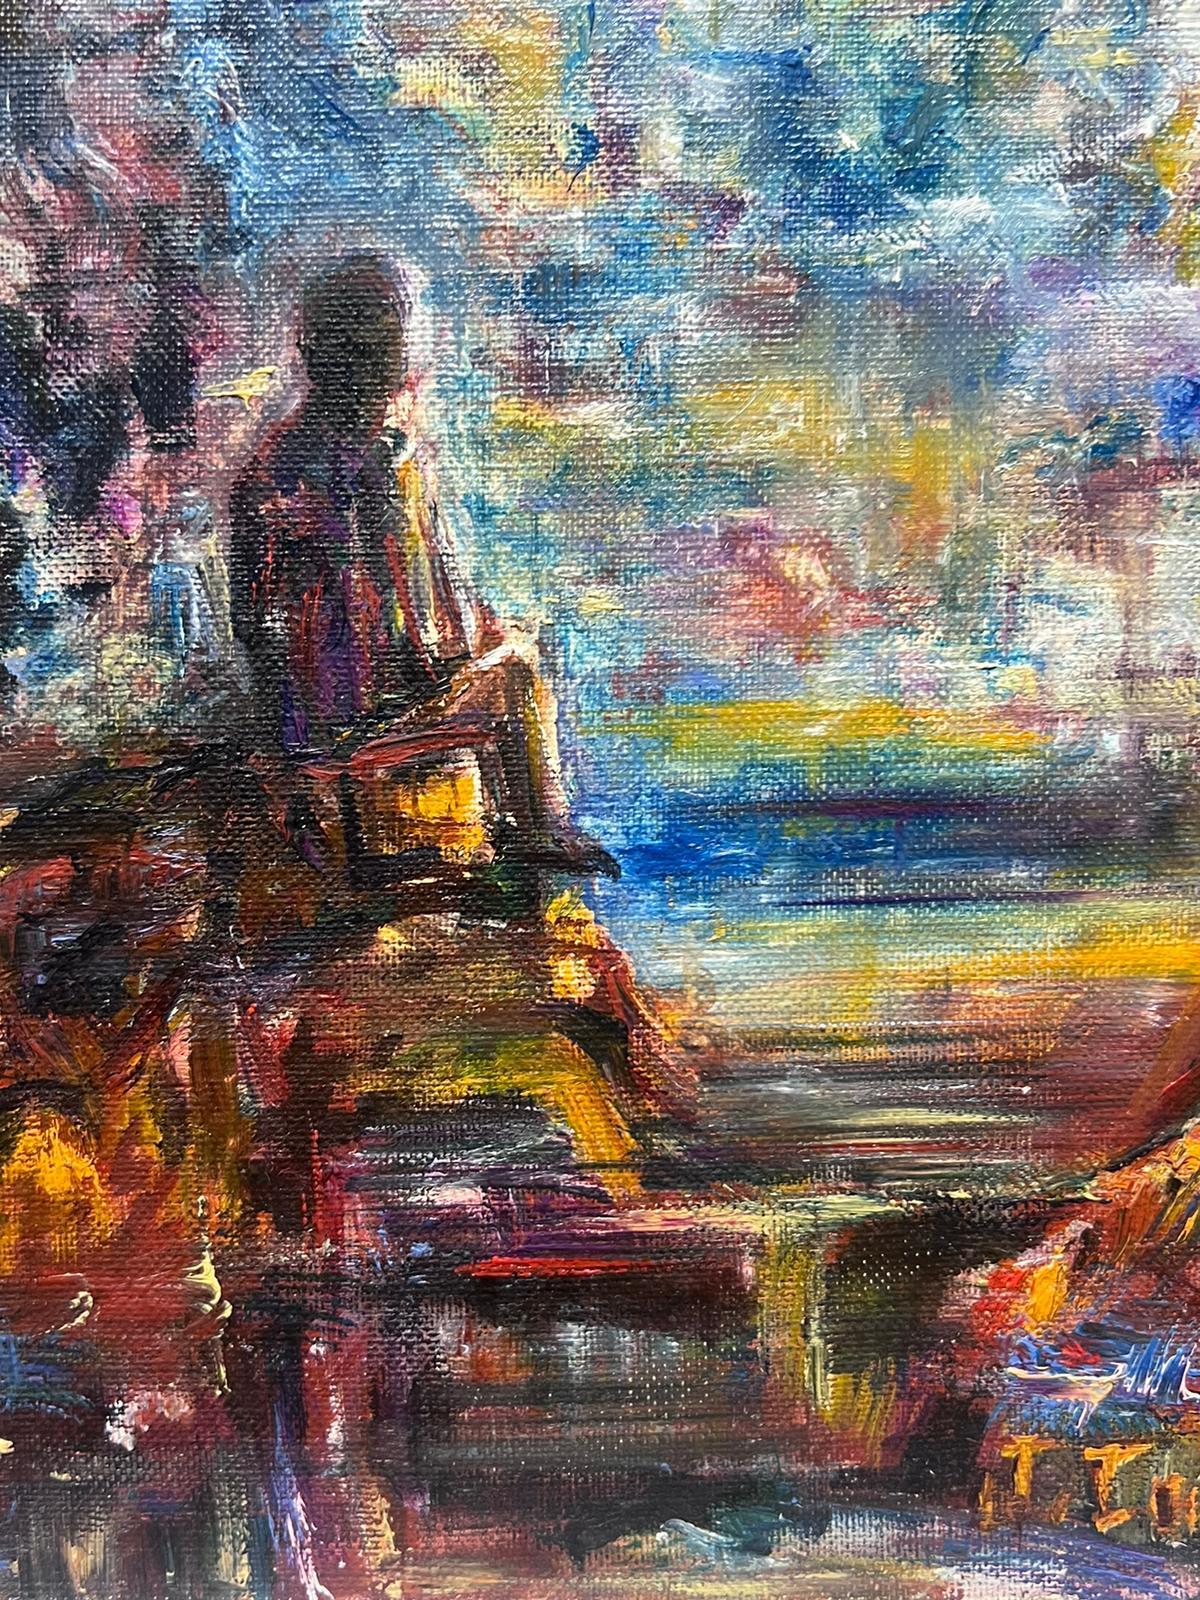 French Expressionist Figure Gazing Into The Sunset Reflection Studio Provenance - Abstract Impressionist Painting by Jacques Coulais (1955-2011)